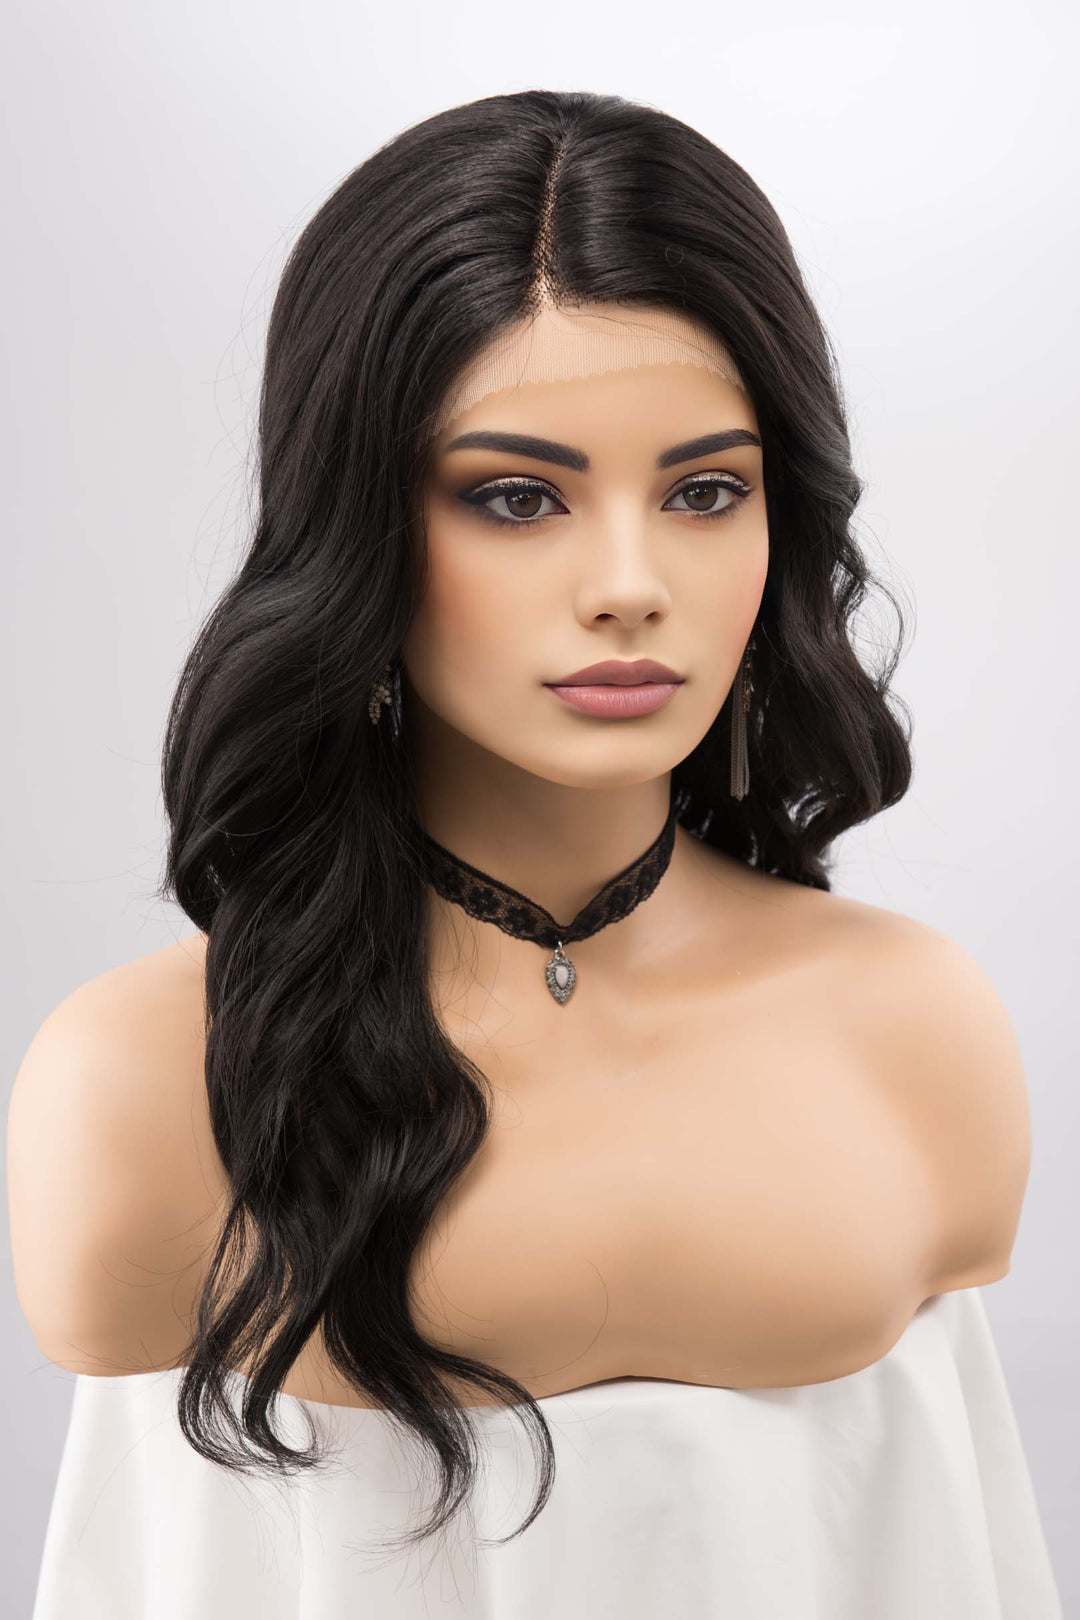 Natural Black Wig Jet Black Lace Front Wig Wavy Front Lace Wig Natural Looking Wig for Hair Loss Wigs for Chemo MEGAN